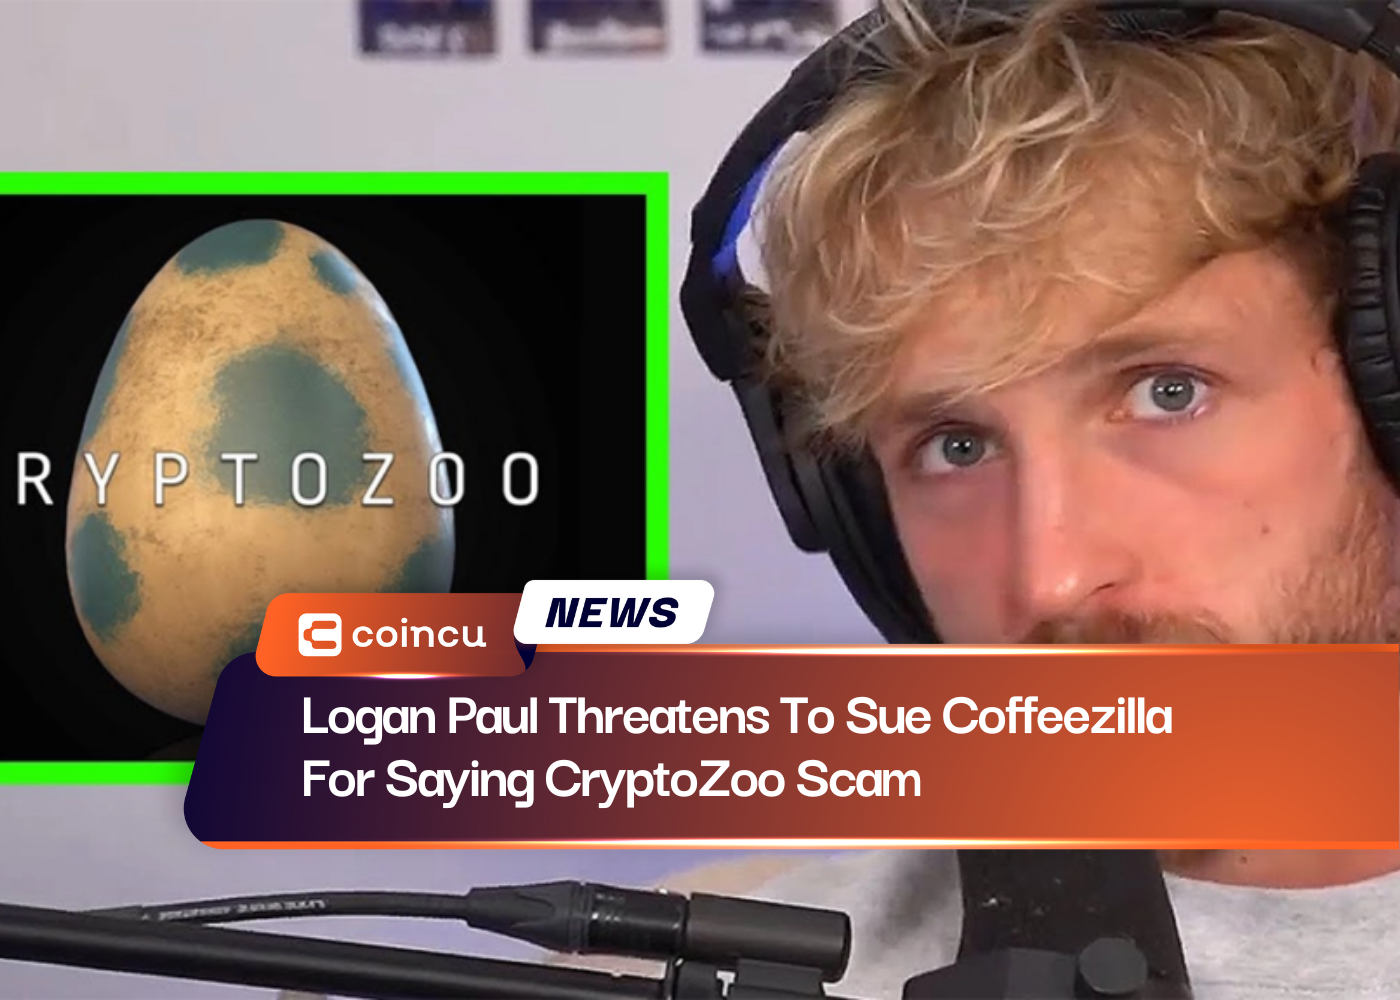 Logan Paul Threatens To Sue Coffeezilla For Saying CryptoZoo Scam